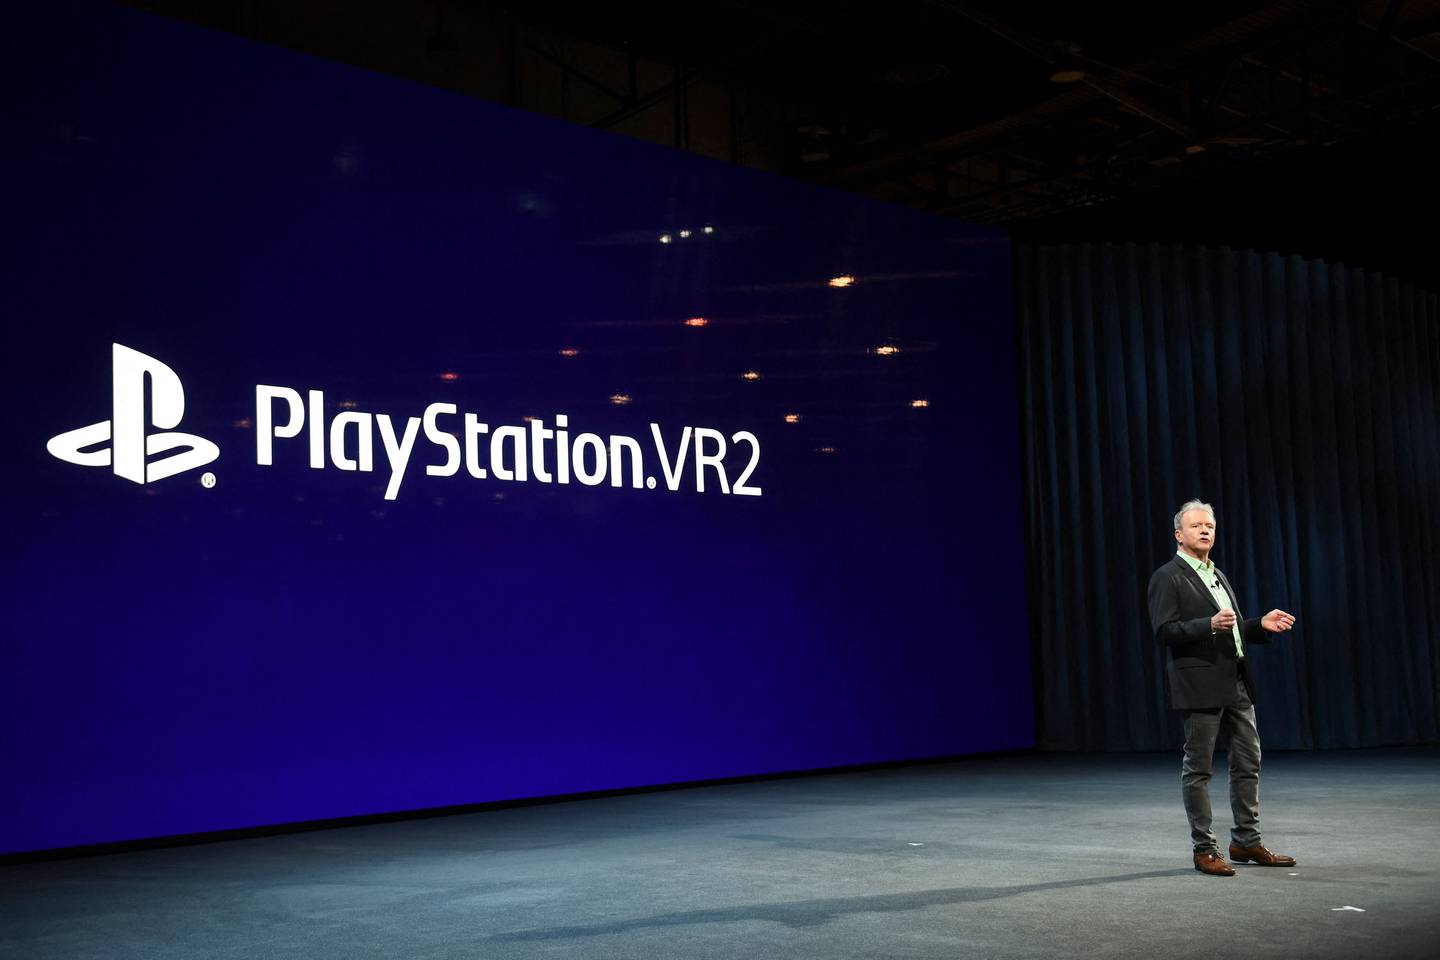 Jim Ryan, Sony interactive entertainment president and chief executive, speaks about PlayStation VR2 in Las Vegas. AFP